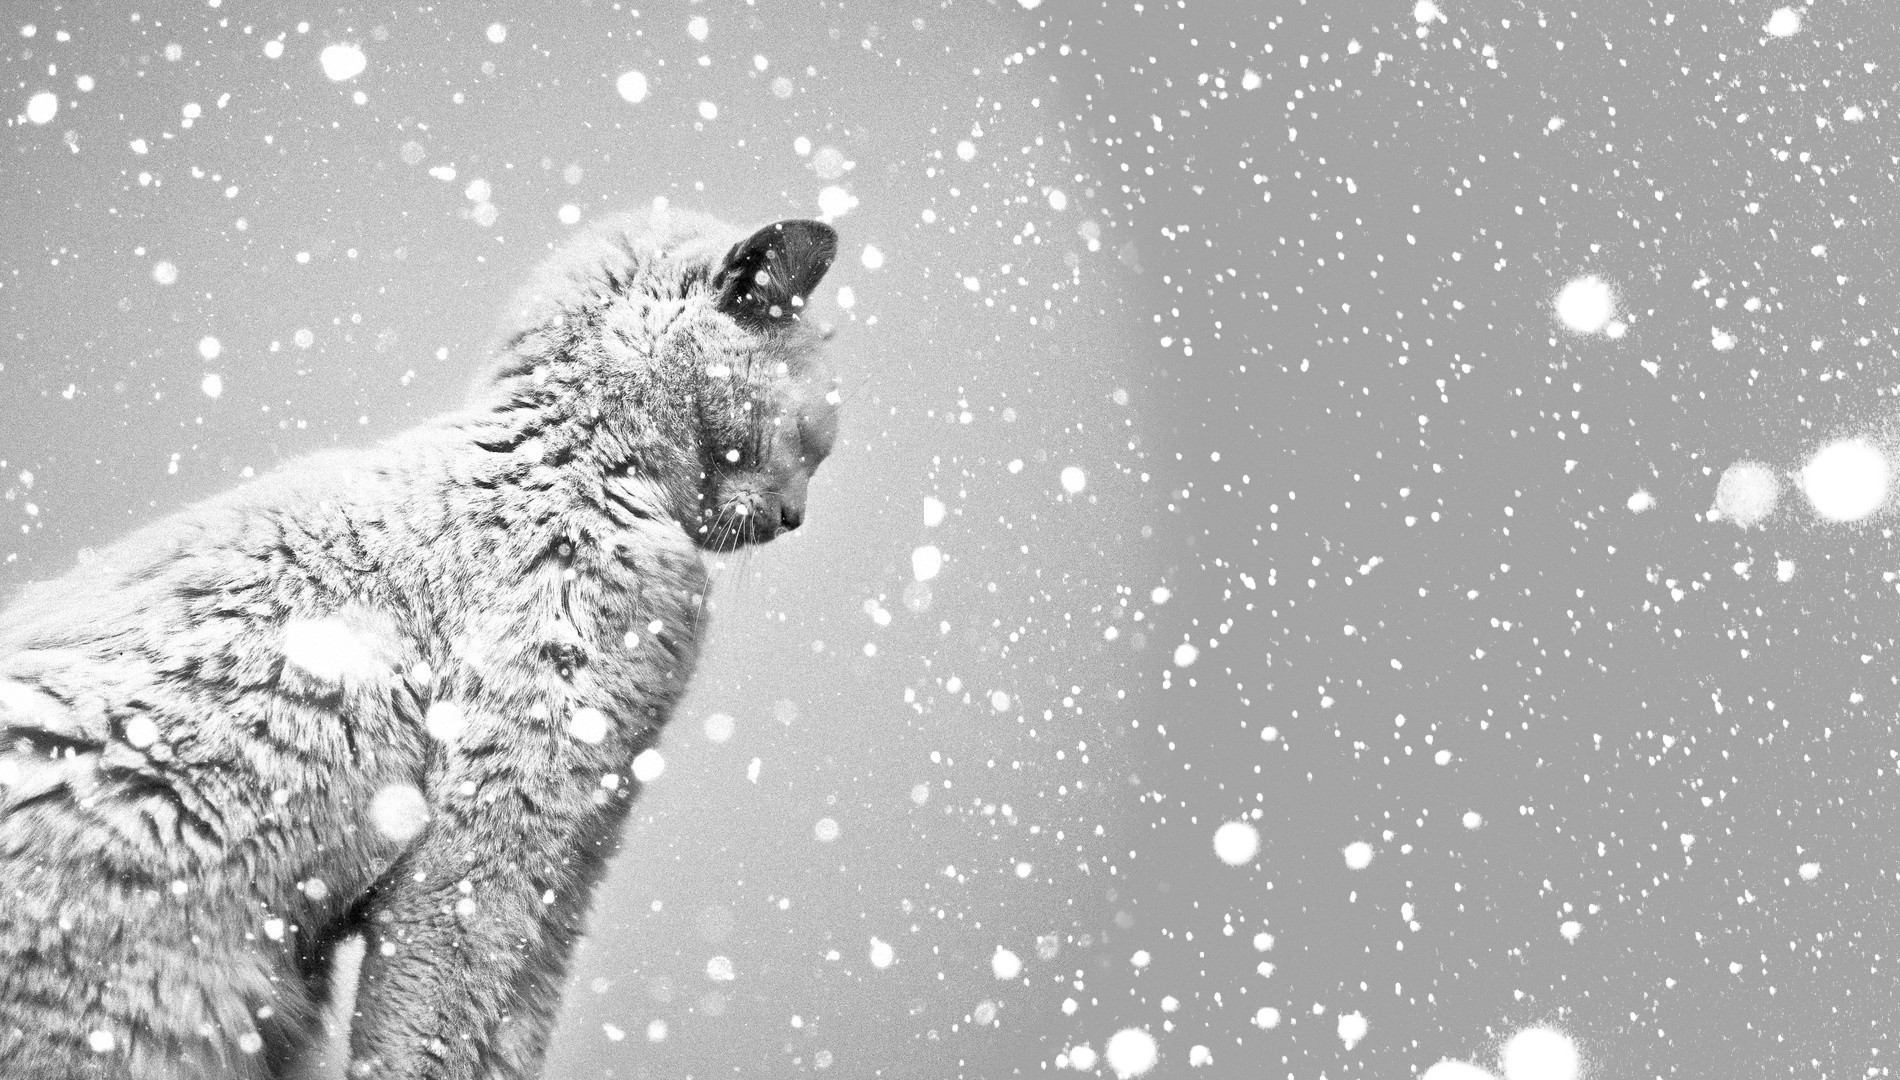 General 1900x1080 photography cats animals snow outdoors winter closed eyes mammals cold